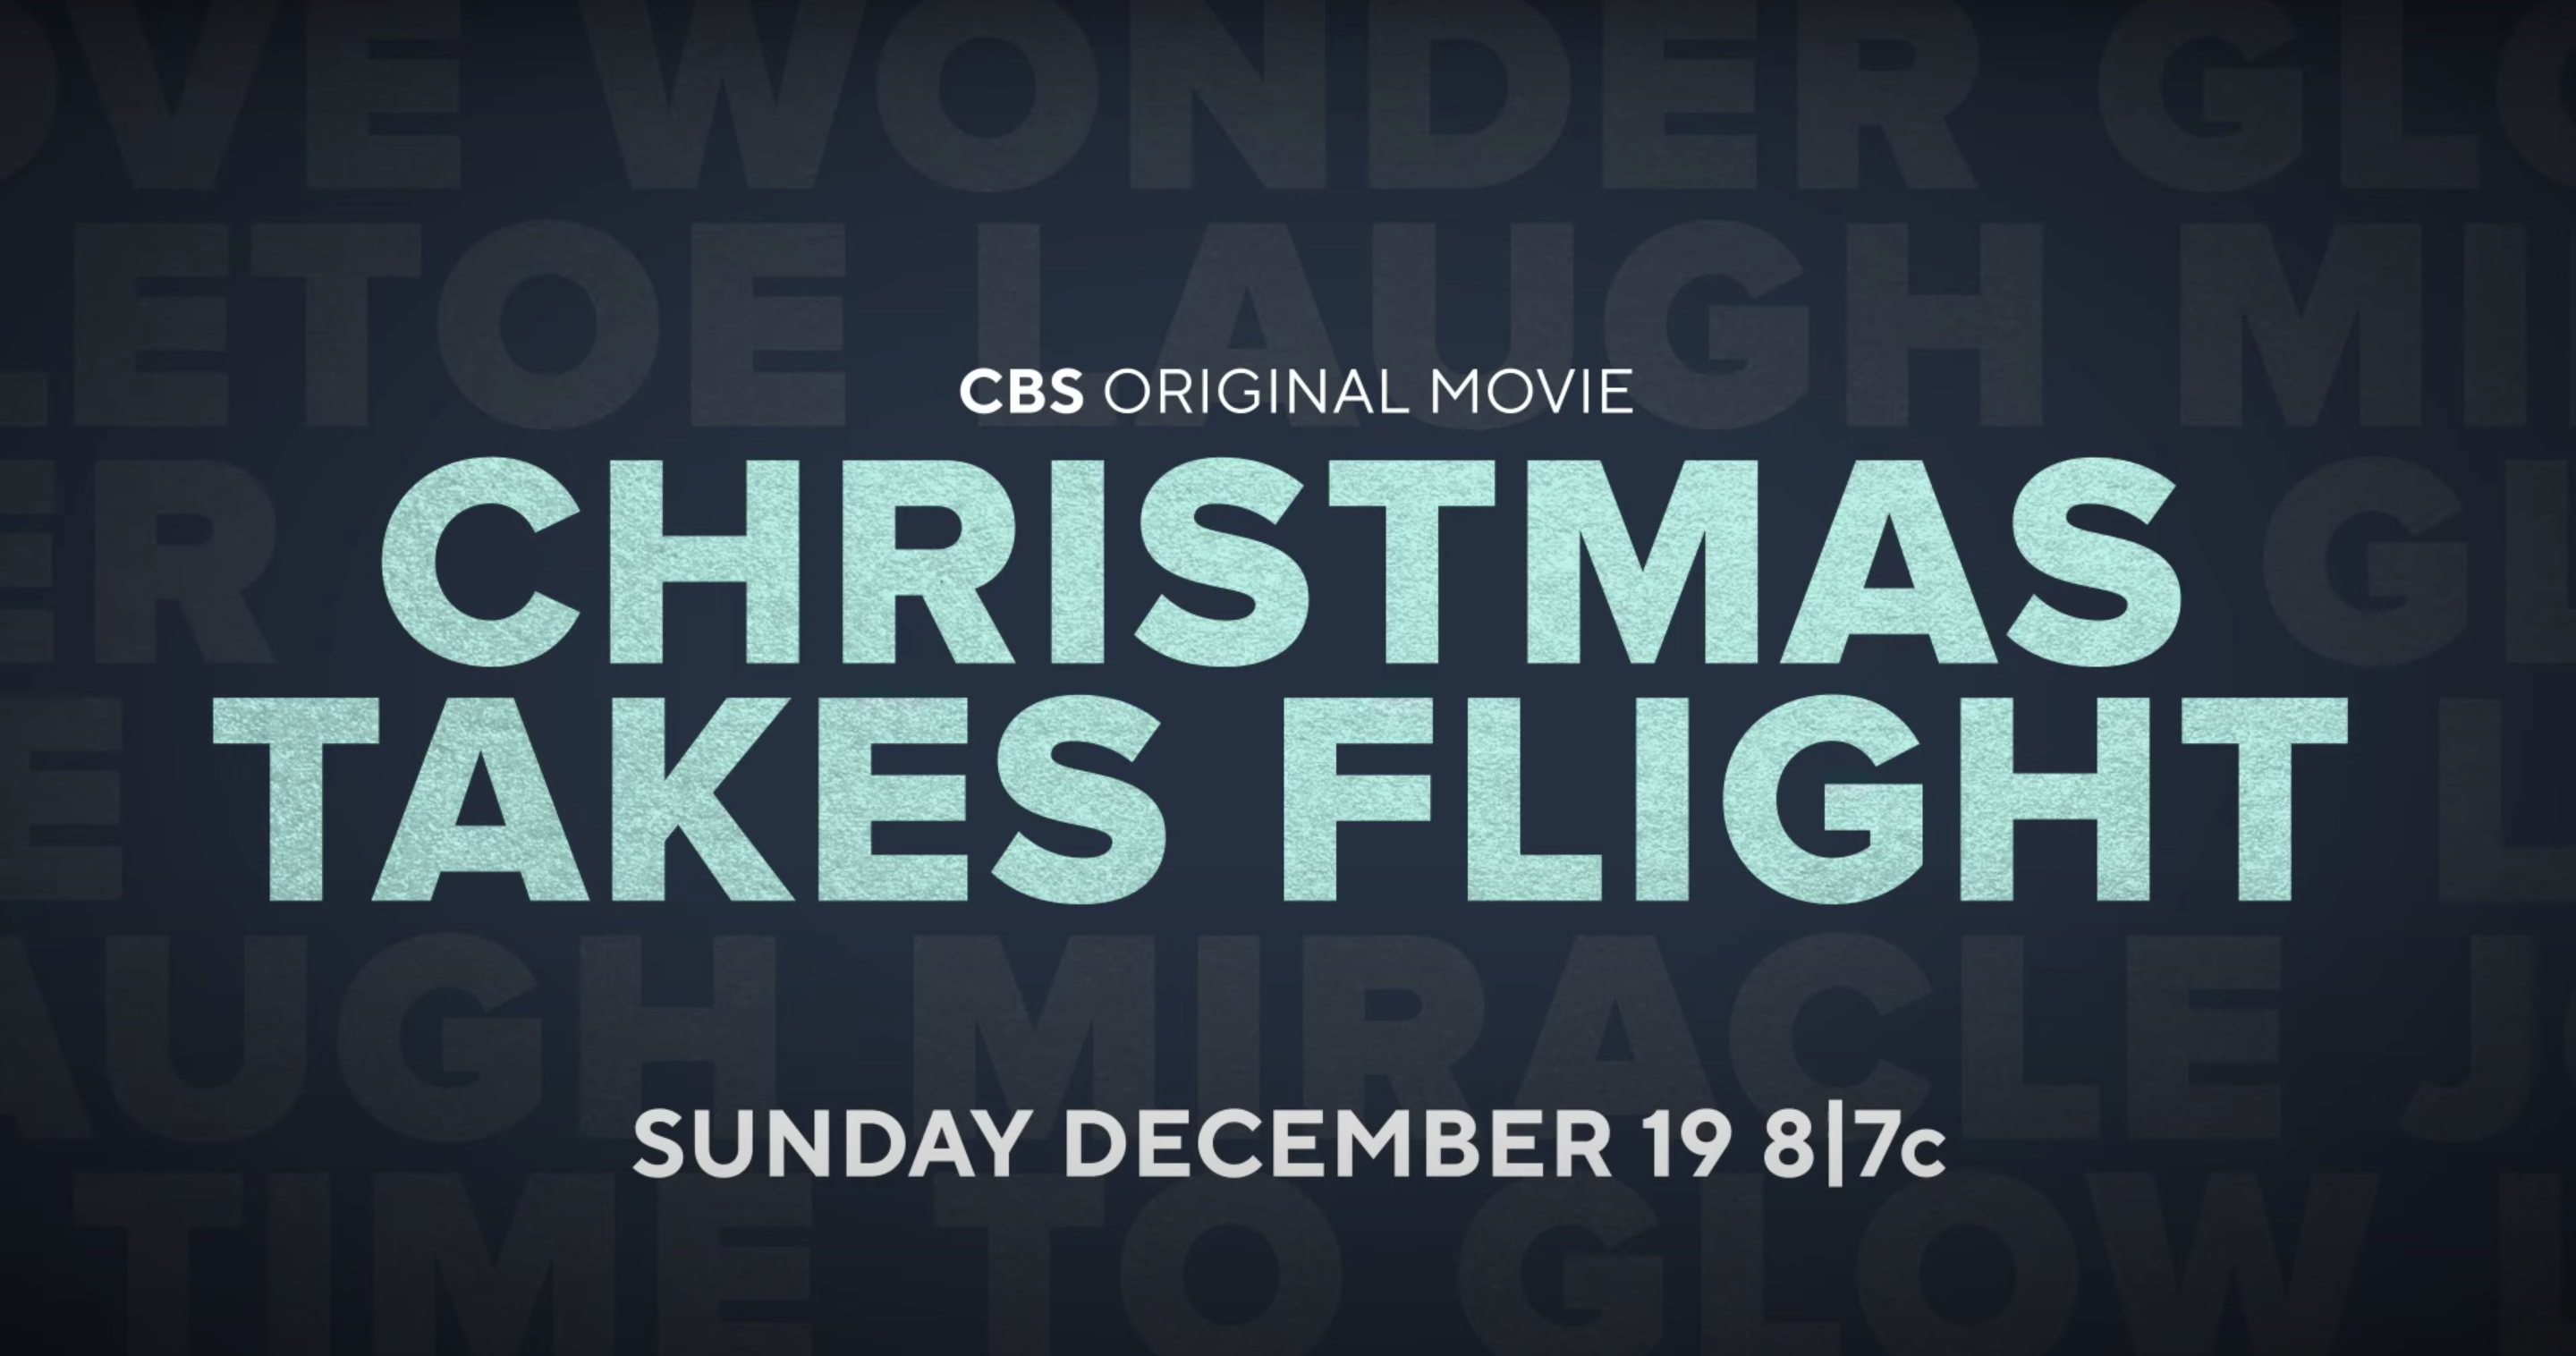 How to Watch “Christmas Takes Flight” holiday movie premiere - mlive.com